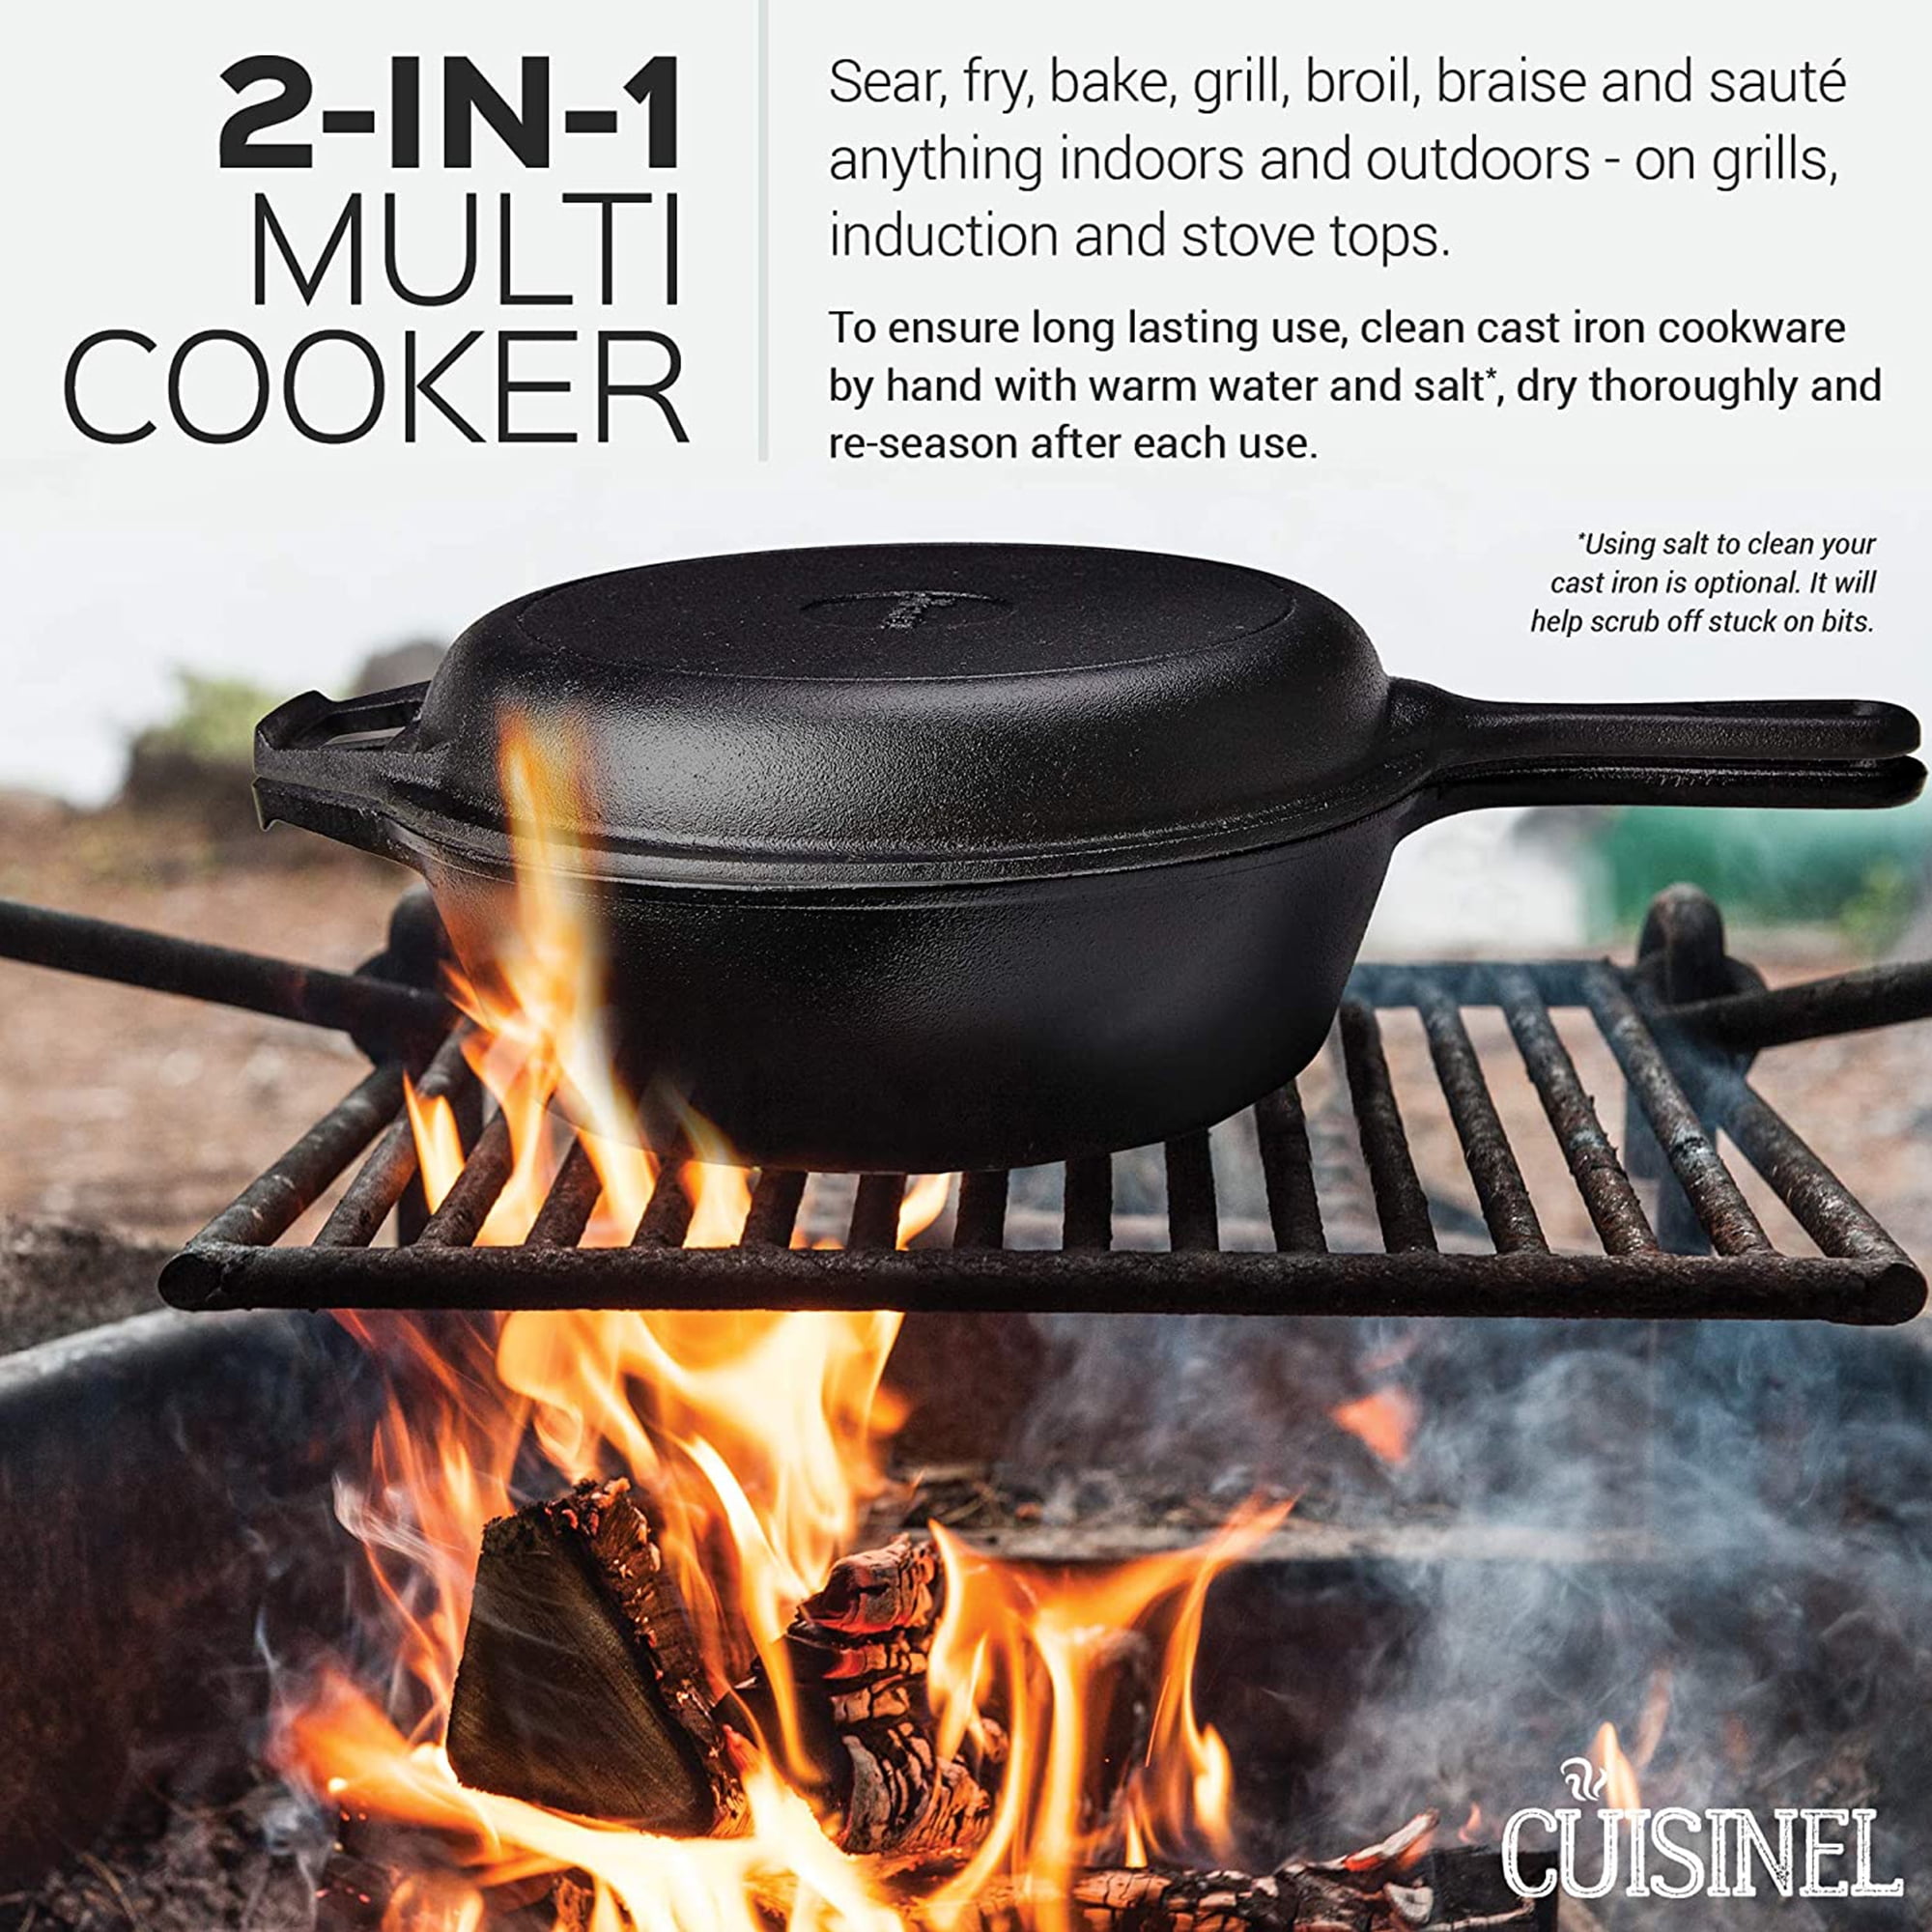 Cuisinel Cast Iron Dutch Oven 7-Quart - Pre-Seasoned 2-in-1 Deep Pot  Multi-Cooker - Combo Lid Doubles as 12-inch Skillet Frying Pan + Silicone  Handle